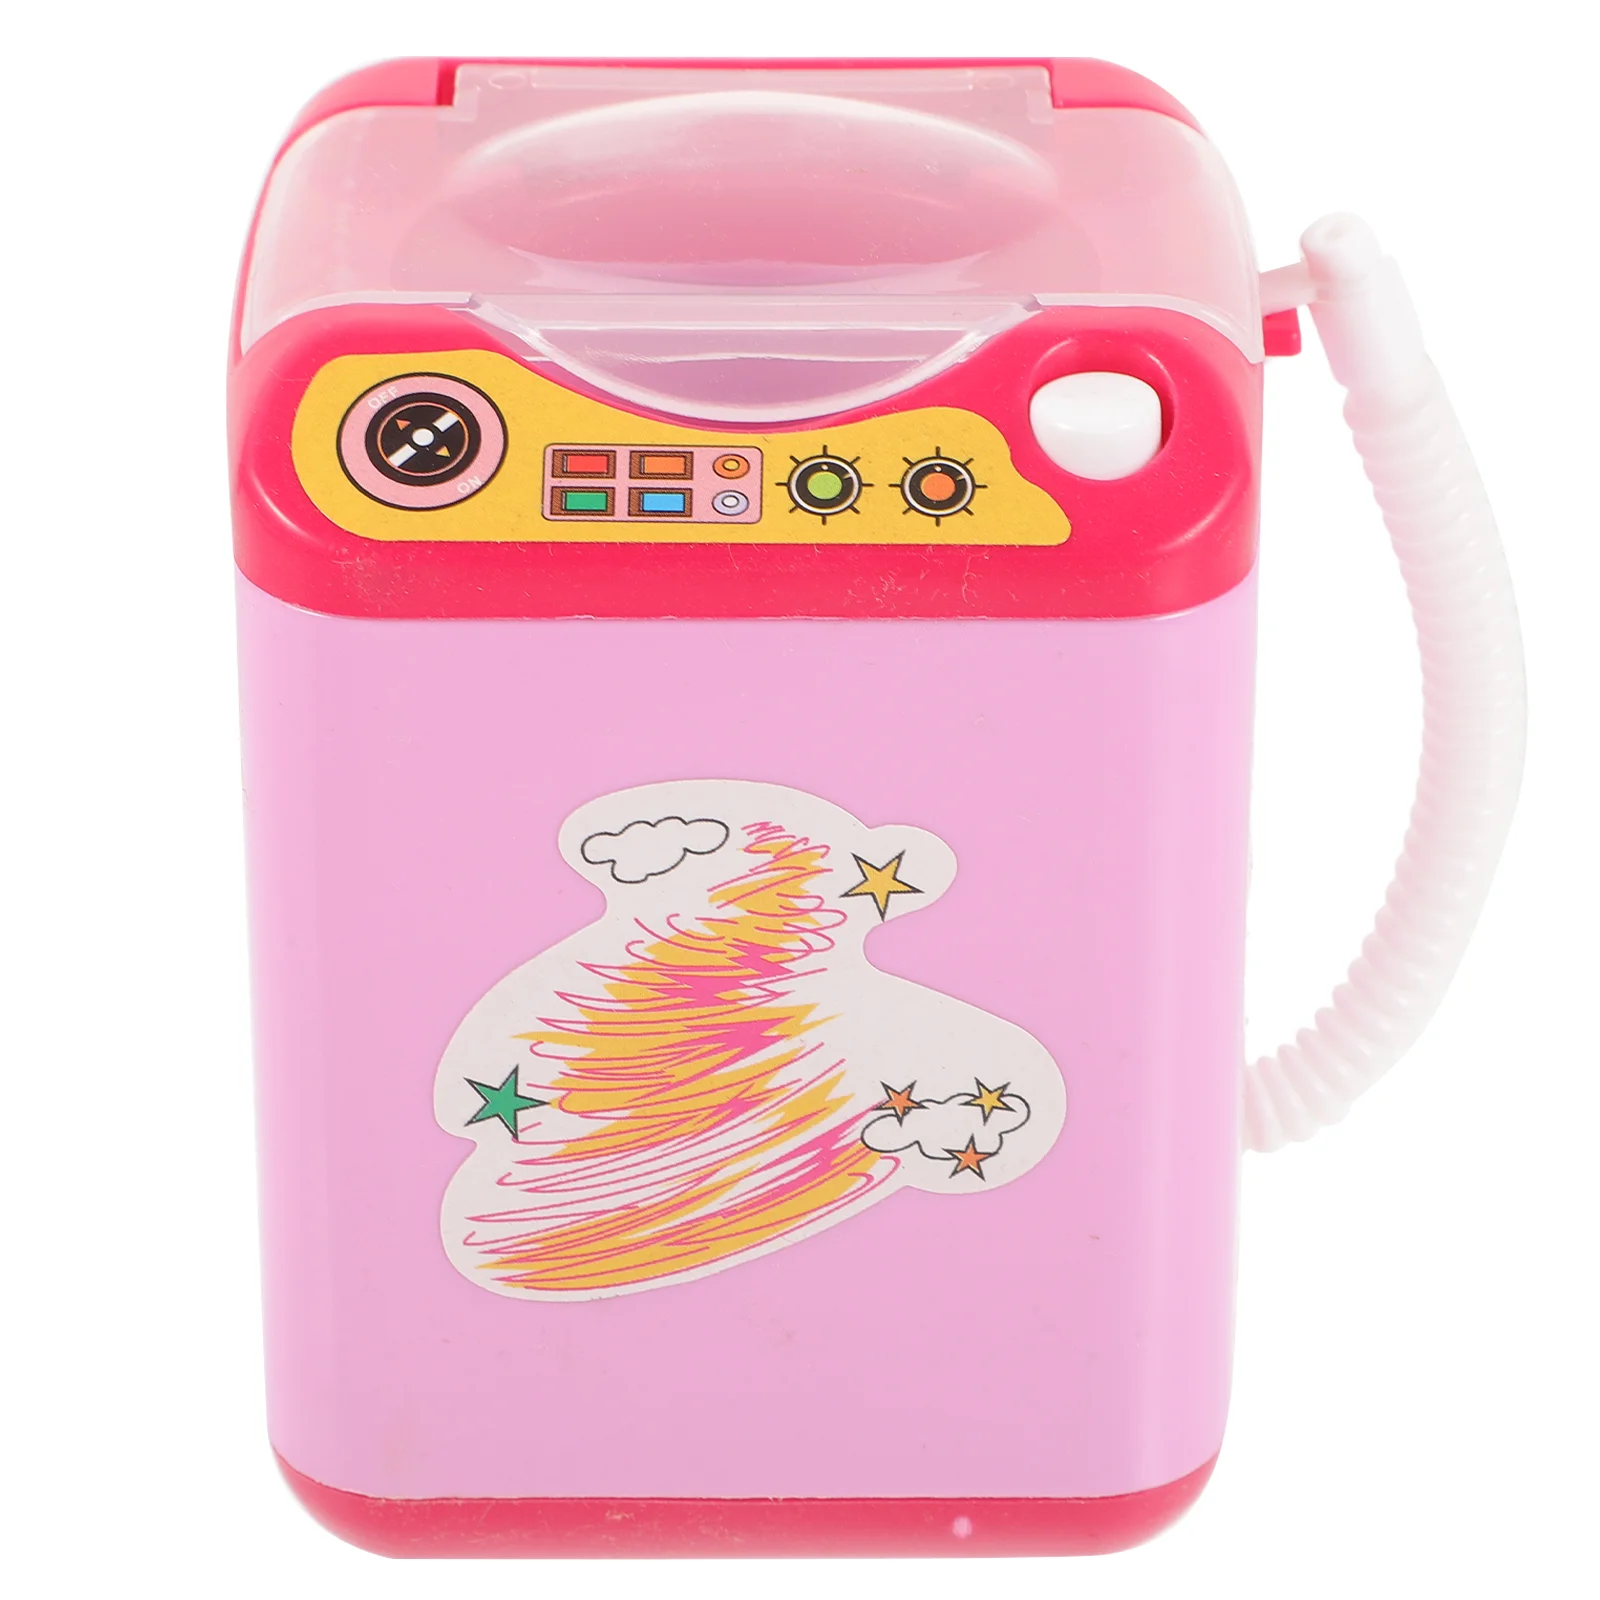 

Washer Machine Makeup Sponge Cleaners Automatic Brush Electric Tiny Washing Plastic Cleaning Child Cleanser